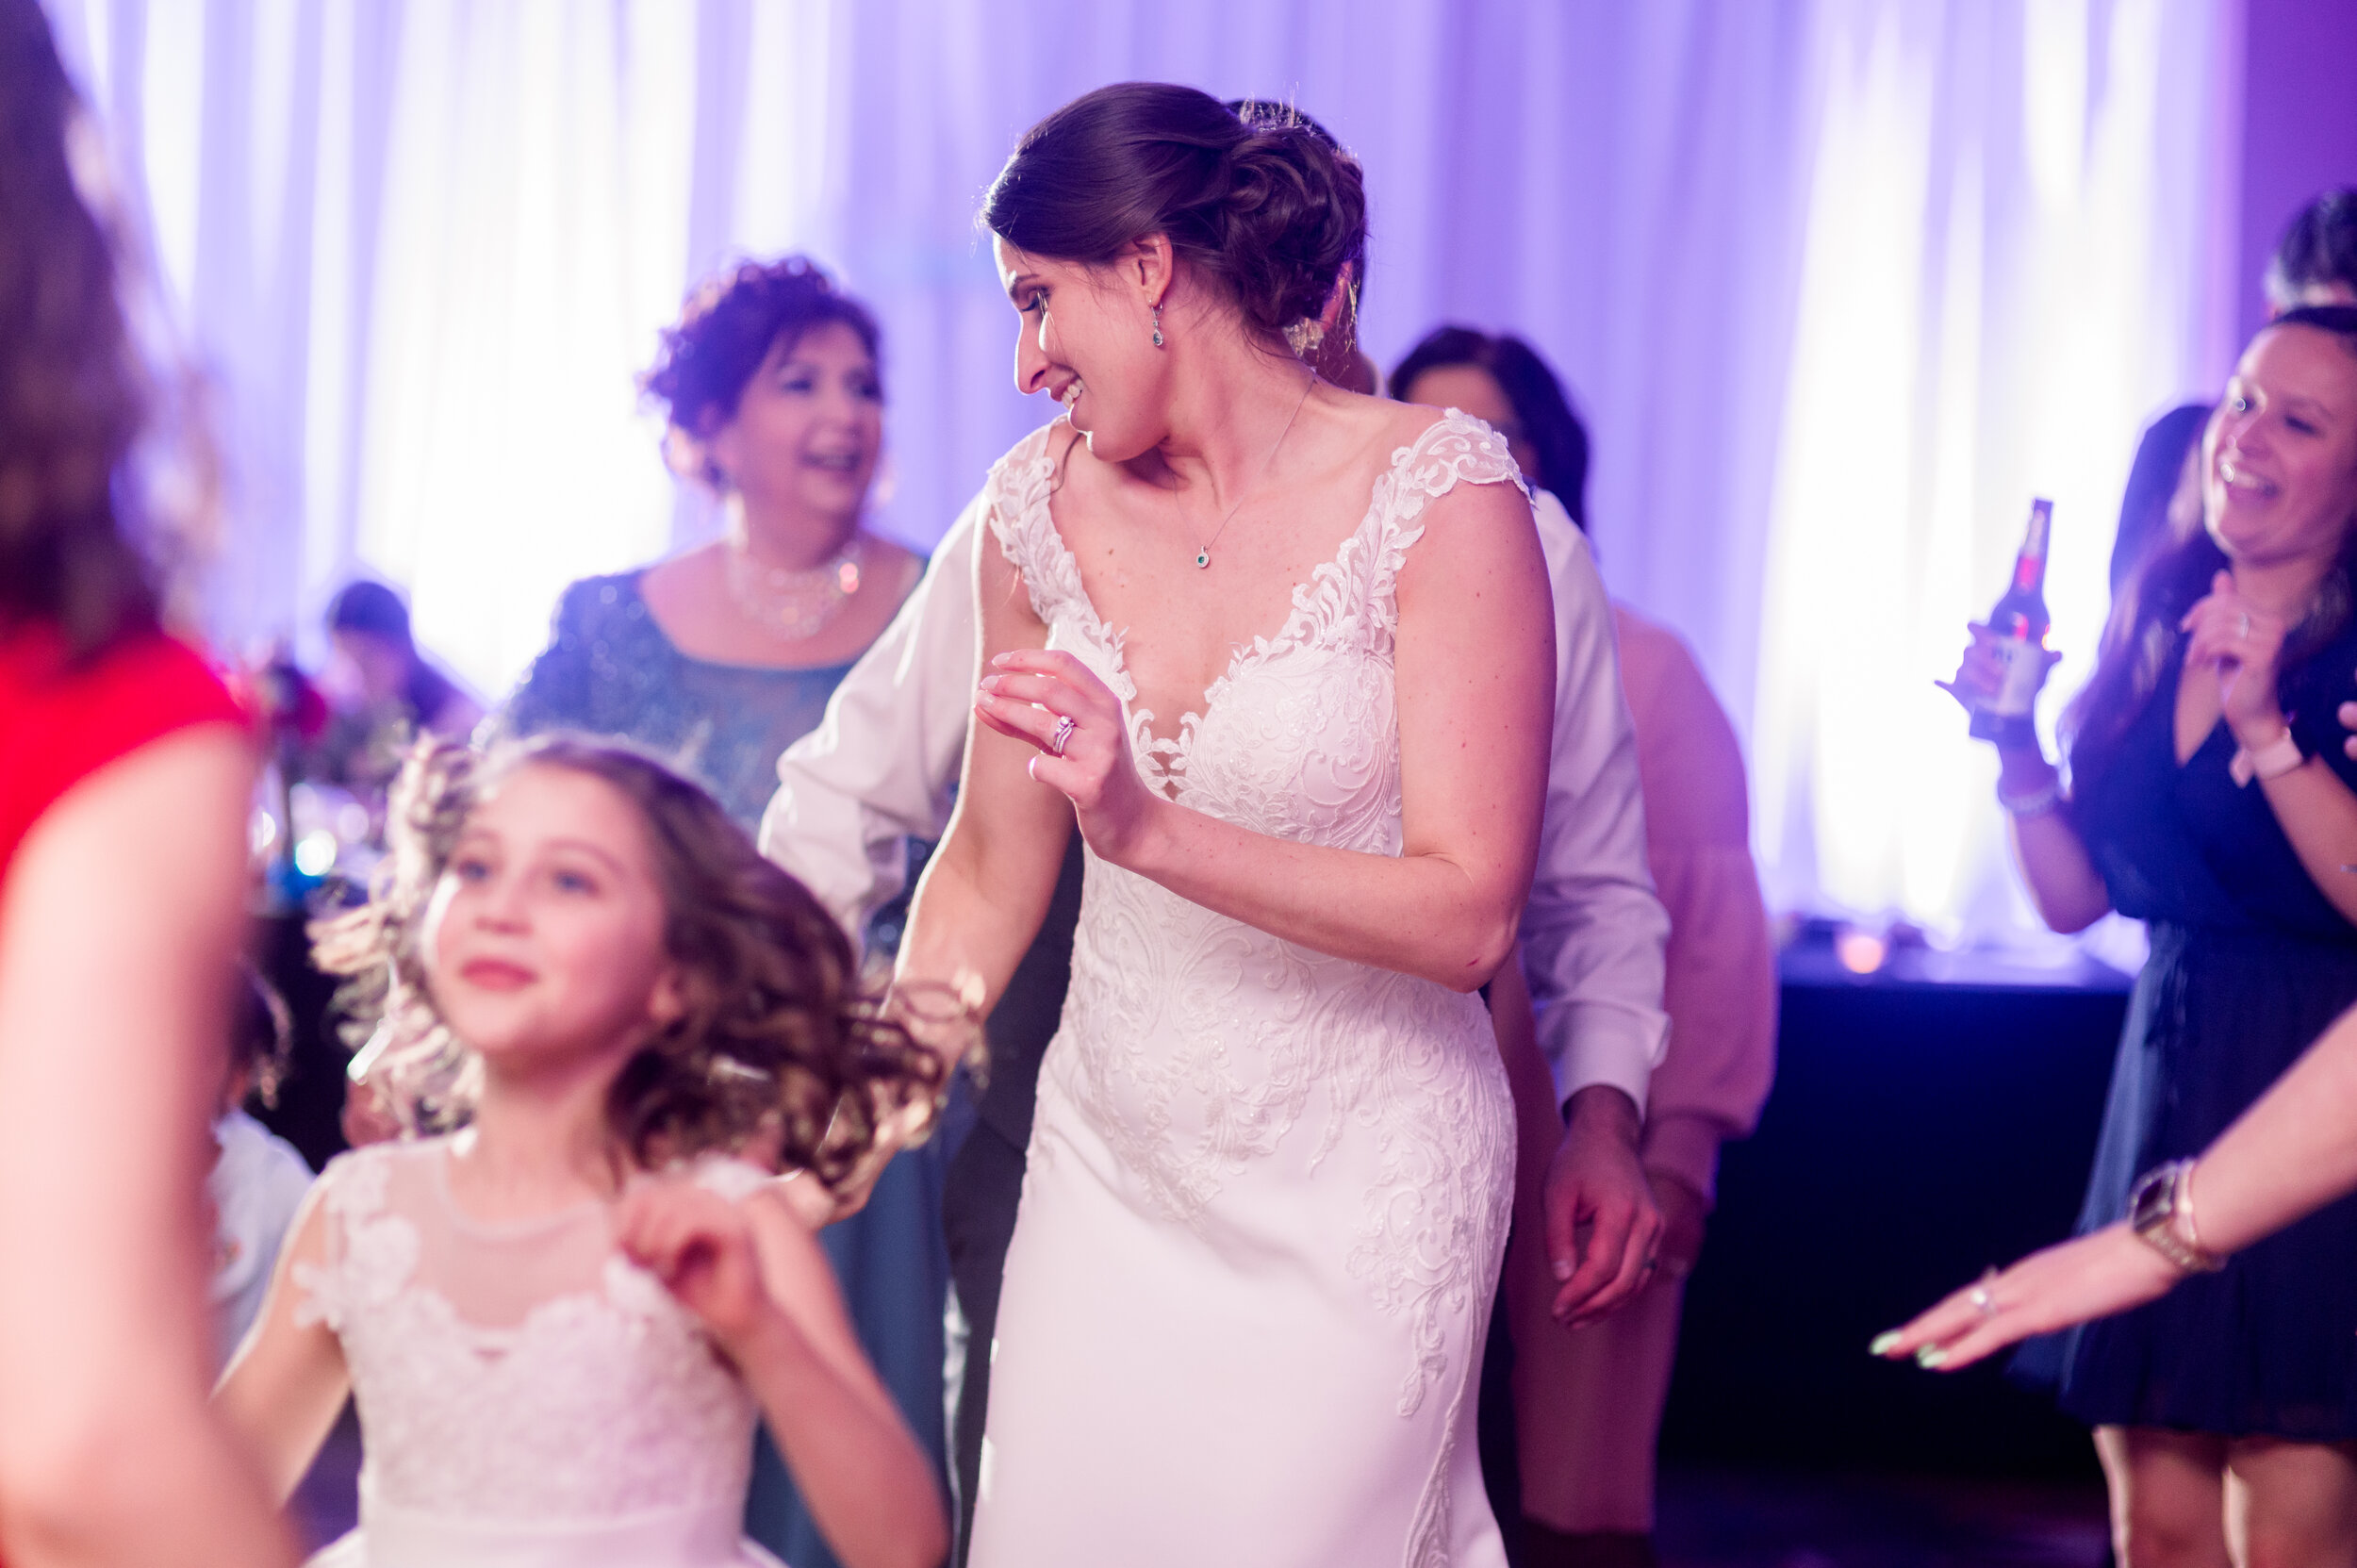 Weddings-at-The-DoubleTree-by-Hilton-Hotel-Pittsburgh-Ashley-Reed-Photography-90.jpg